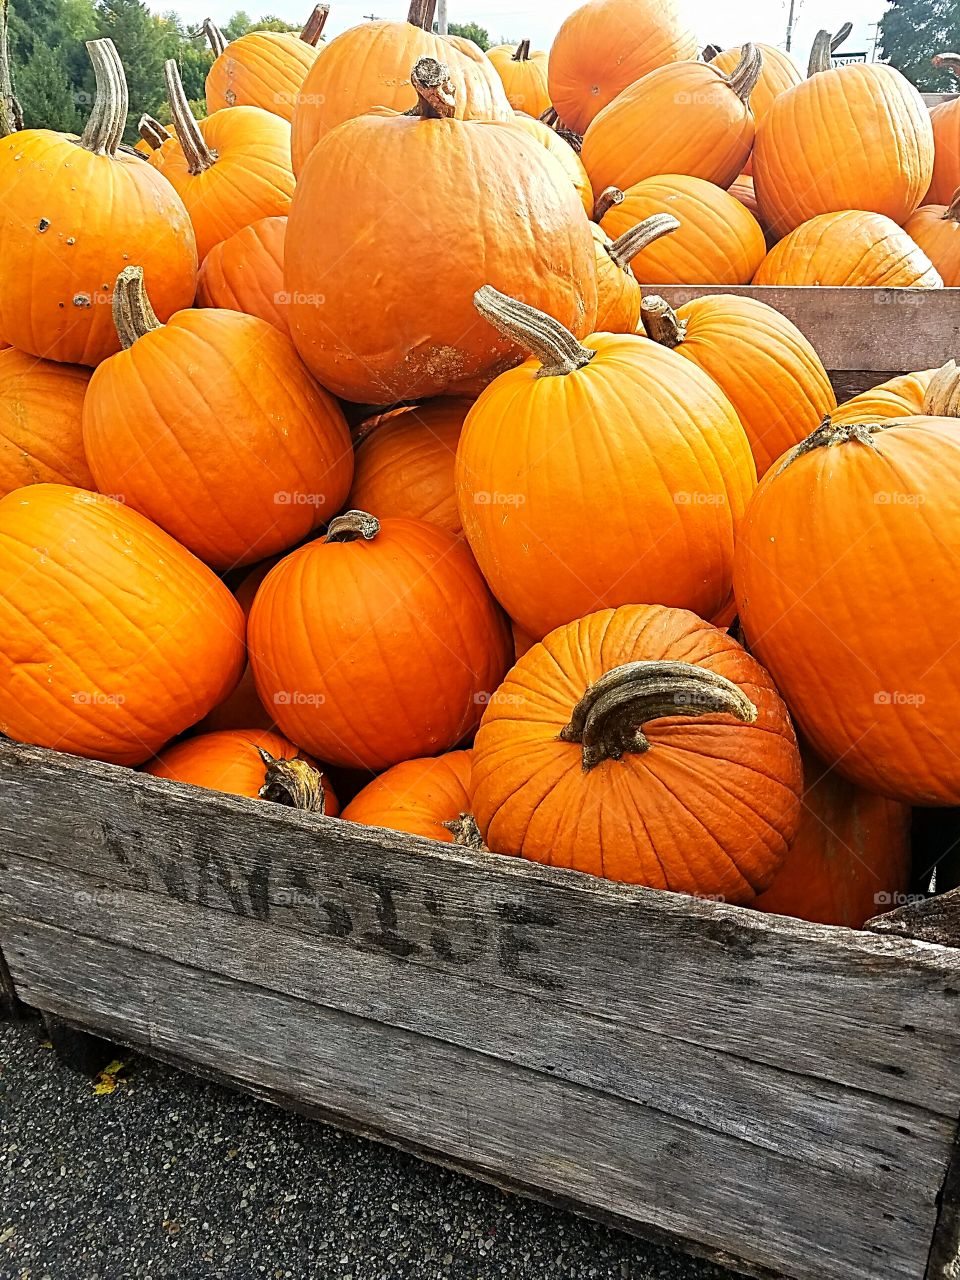 pumpkins for sale in the fall